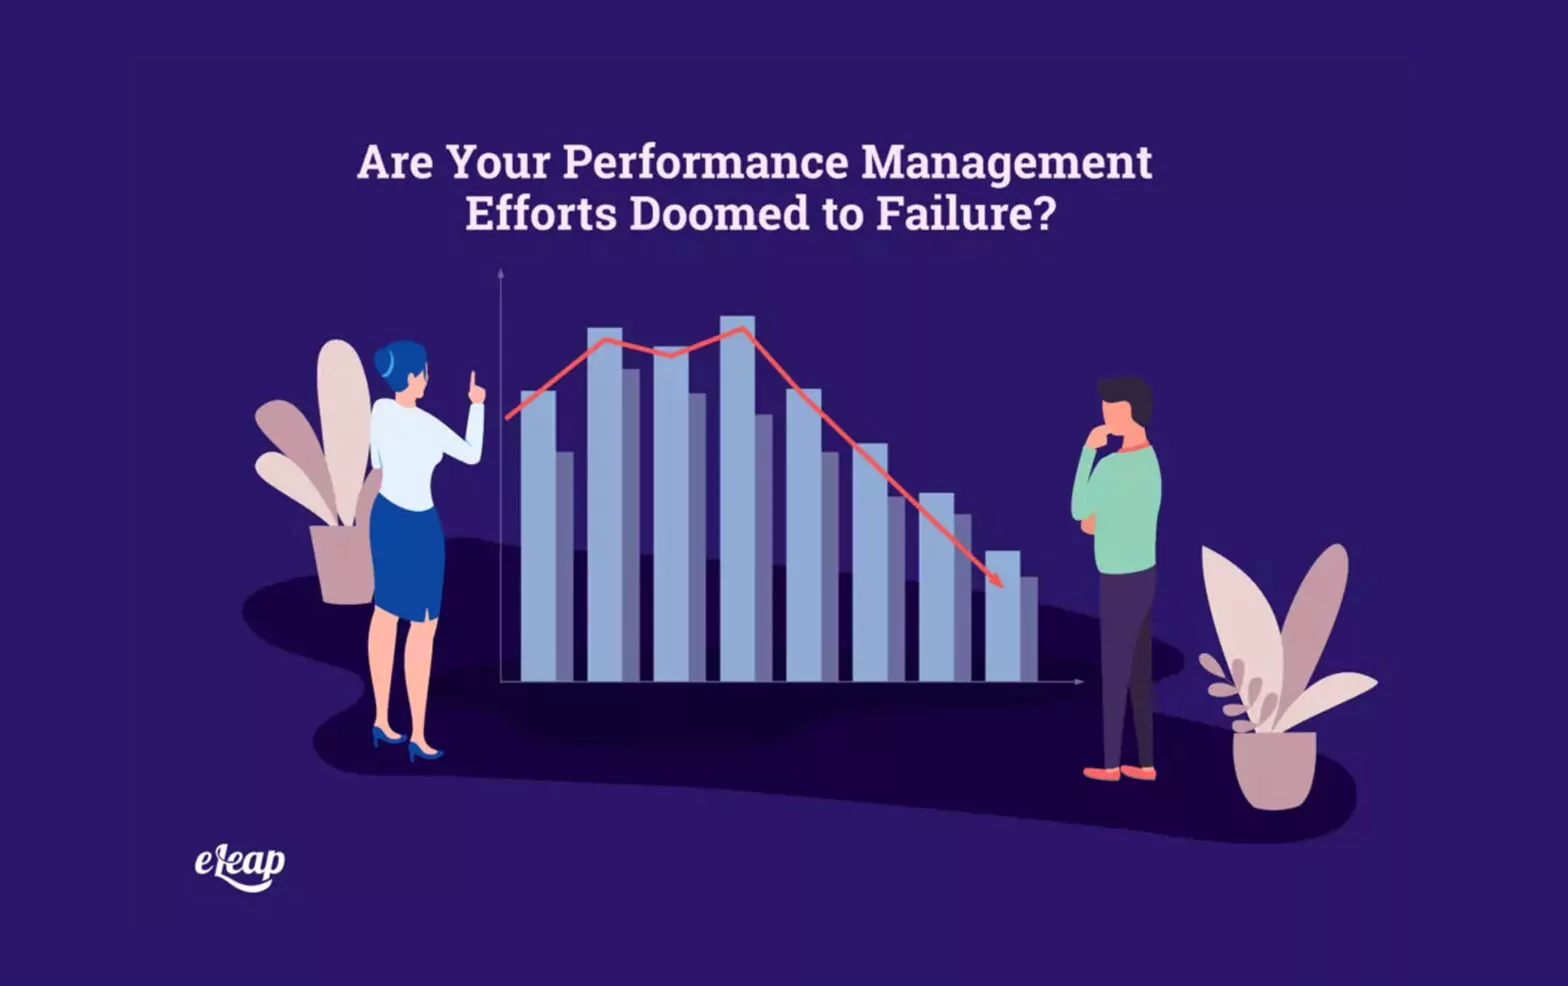 Are Your Performance Management Efforts Doomed to Failure?